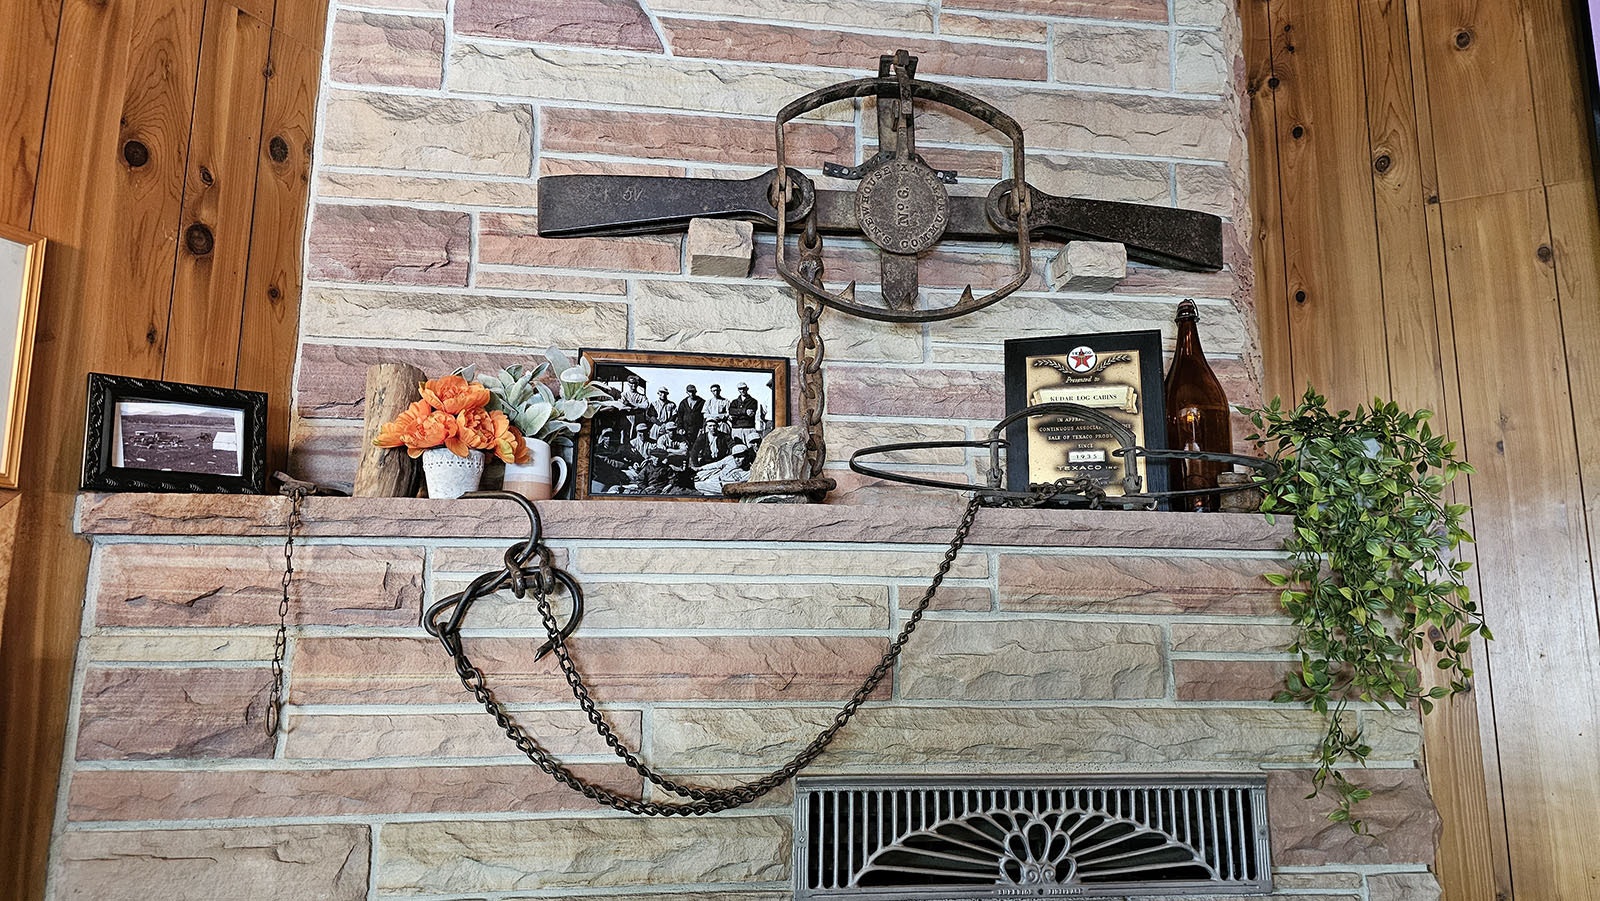 These traps belonged to Joe Kudar and are displayed above the fireplace at the Kudar Cabins.